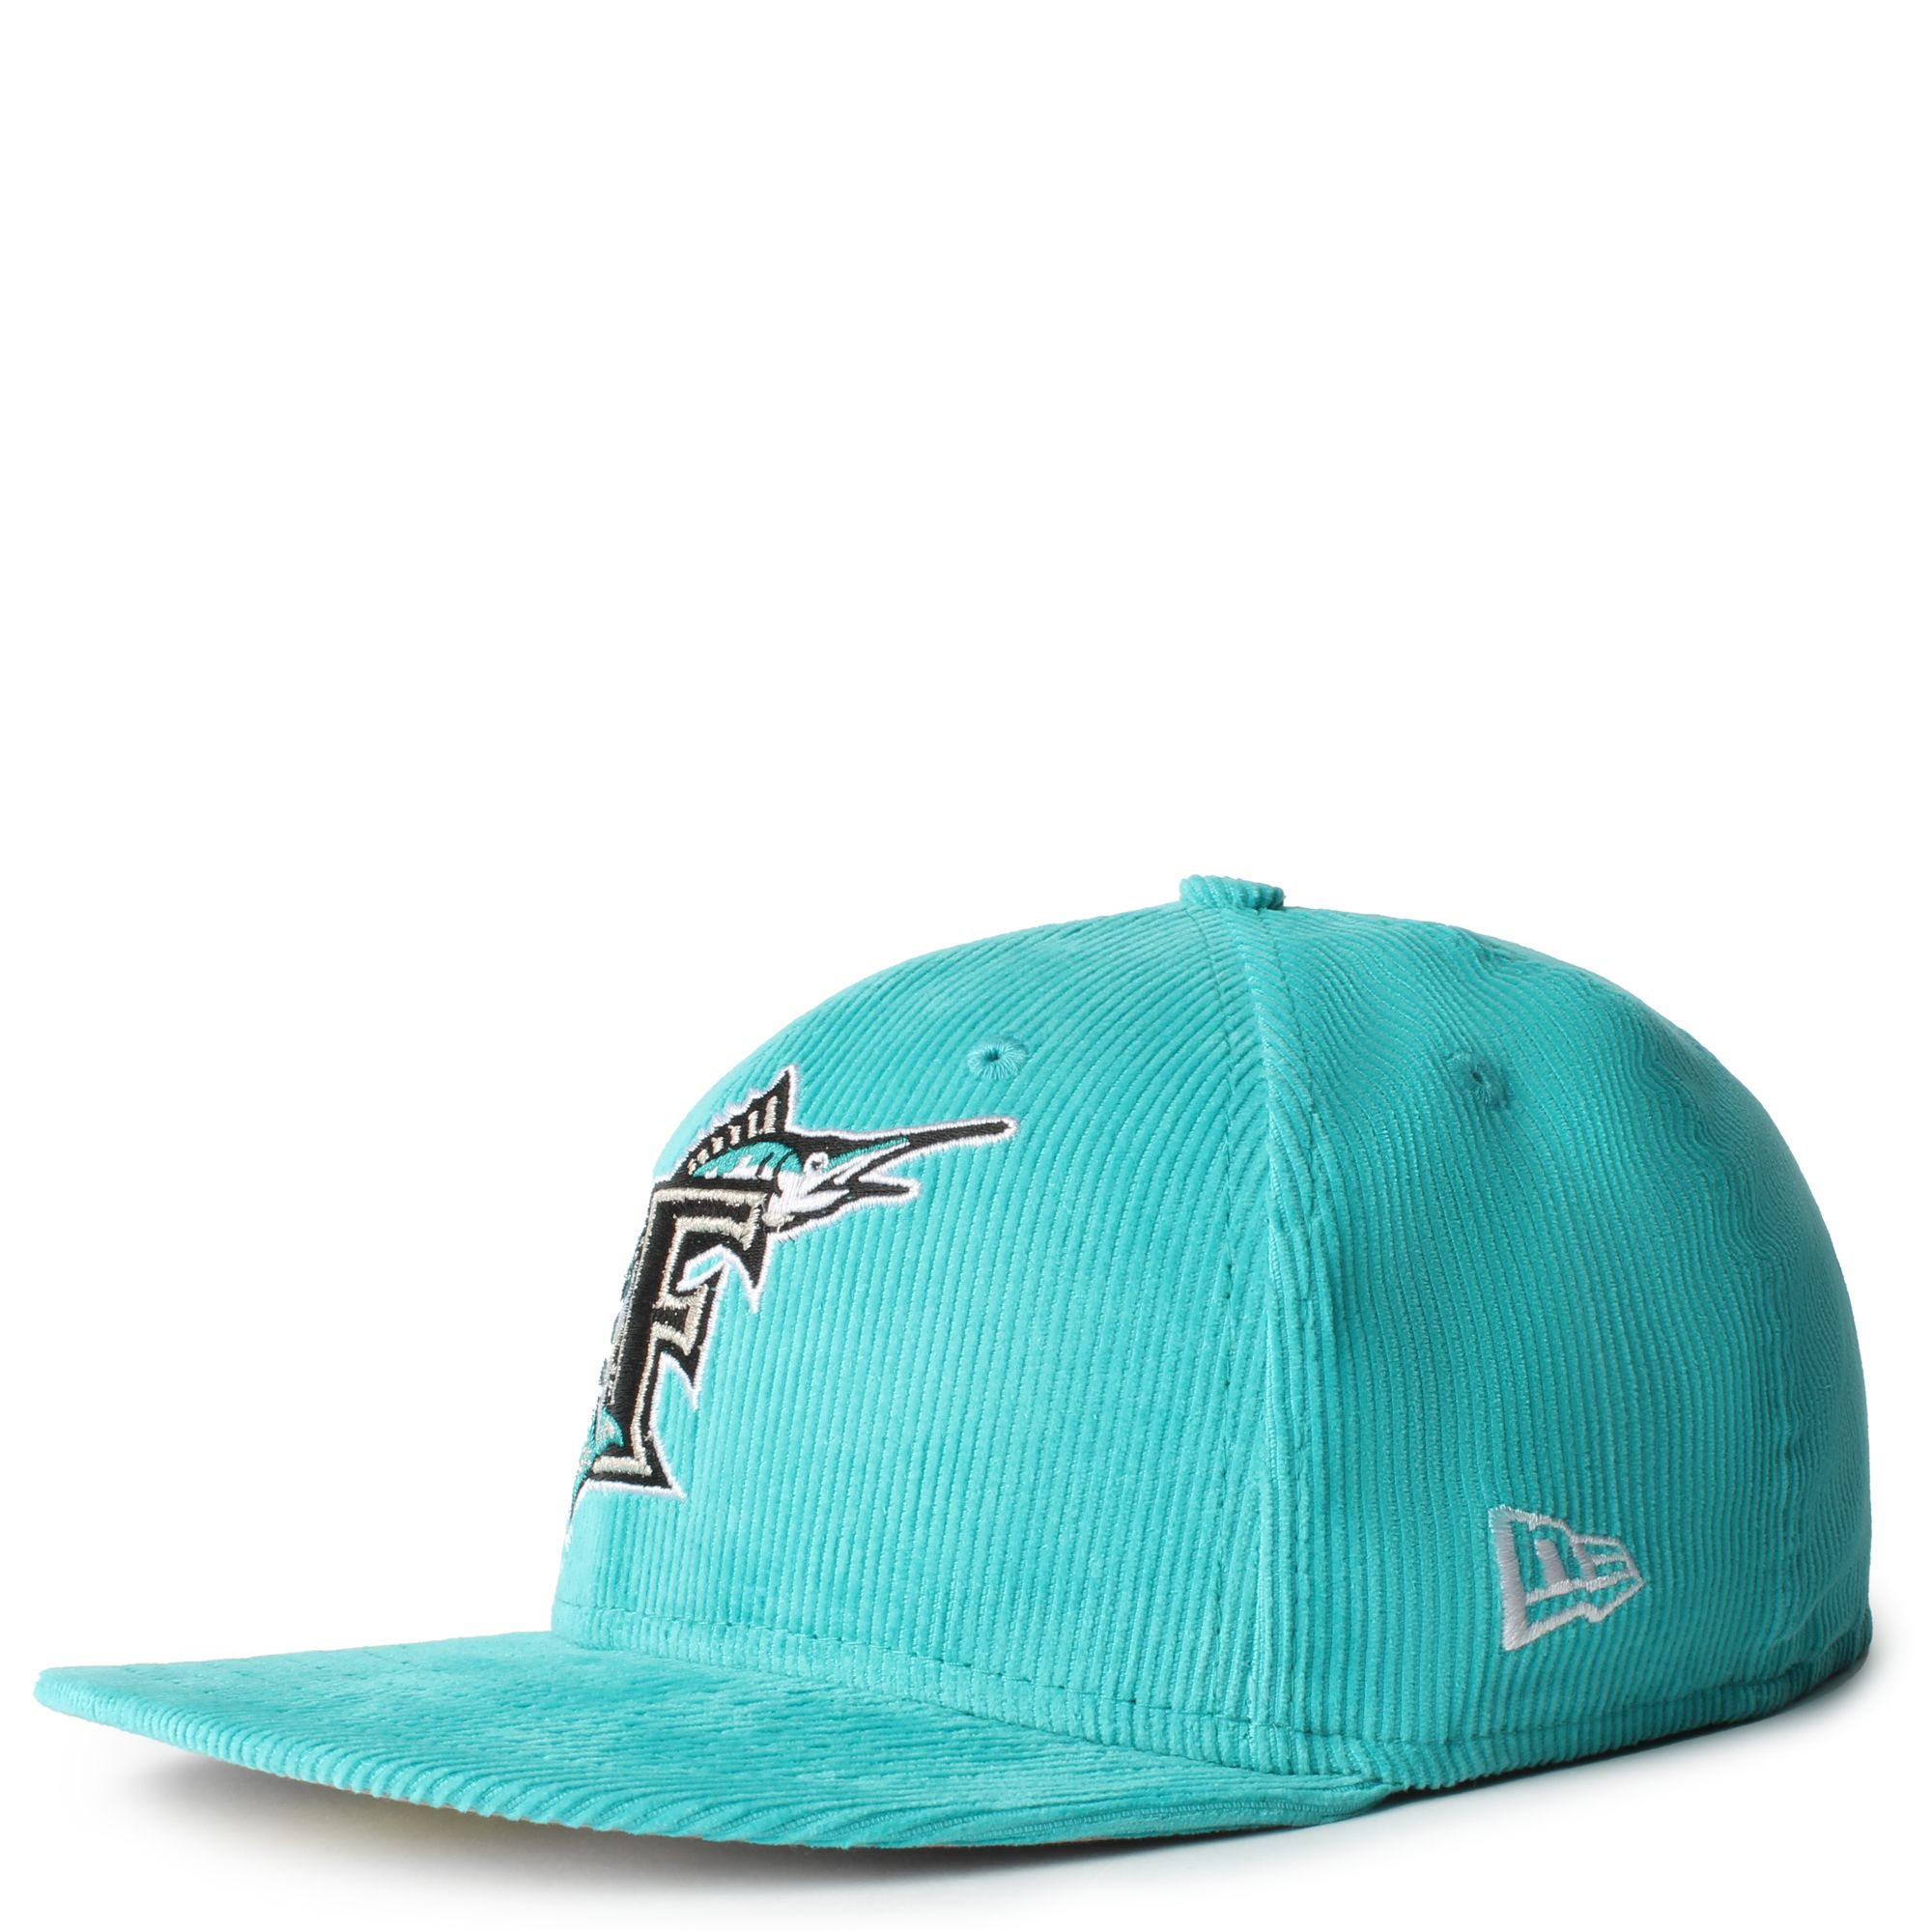 NEW ERA CAPS Florida Marlins Throwback 59Fifty Fitted Hat 60426677